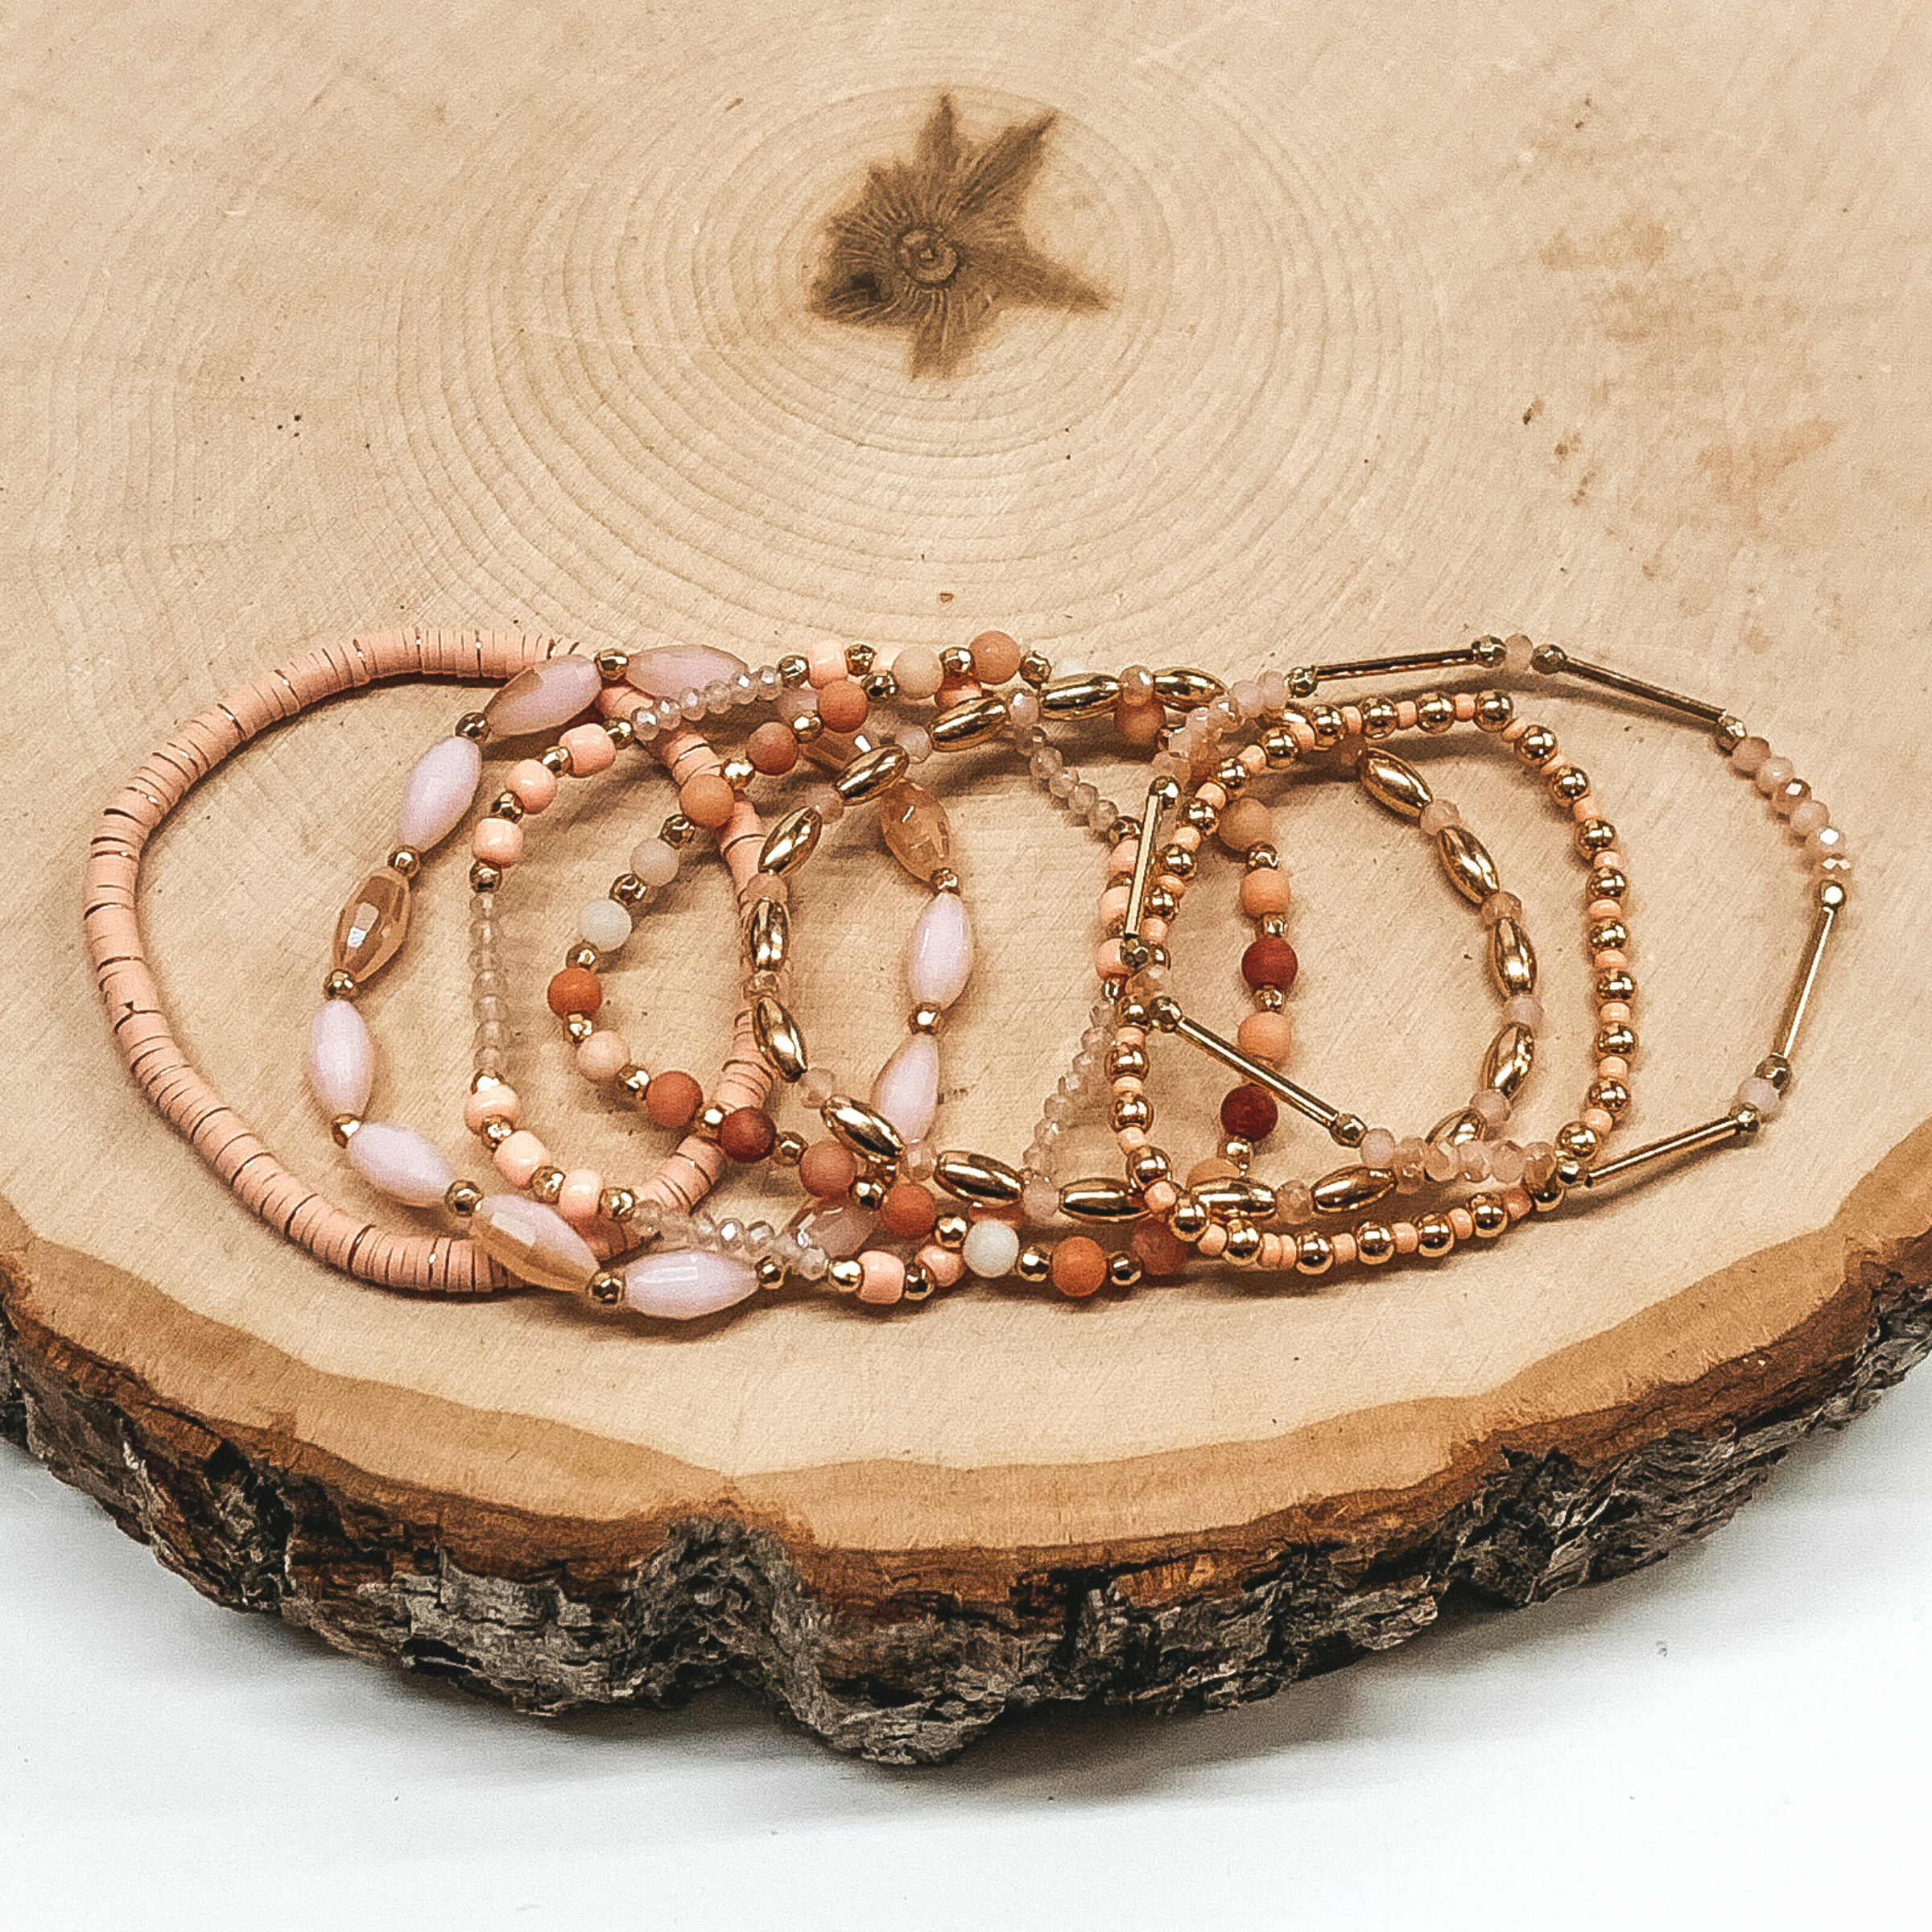 This bracelet set is a mix of light pink and gold beads. All seven bracelets are a different mix of beads, including, disk beads, crystal beads, circle beads, and bar beads. These are pictured on a piece of wood on a white background.